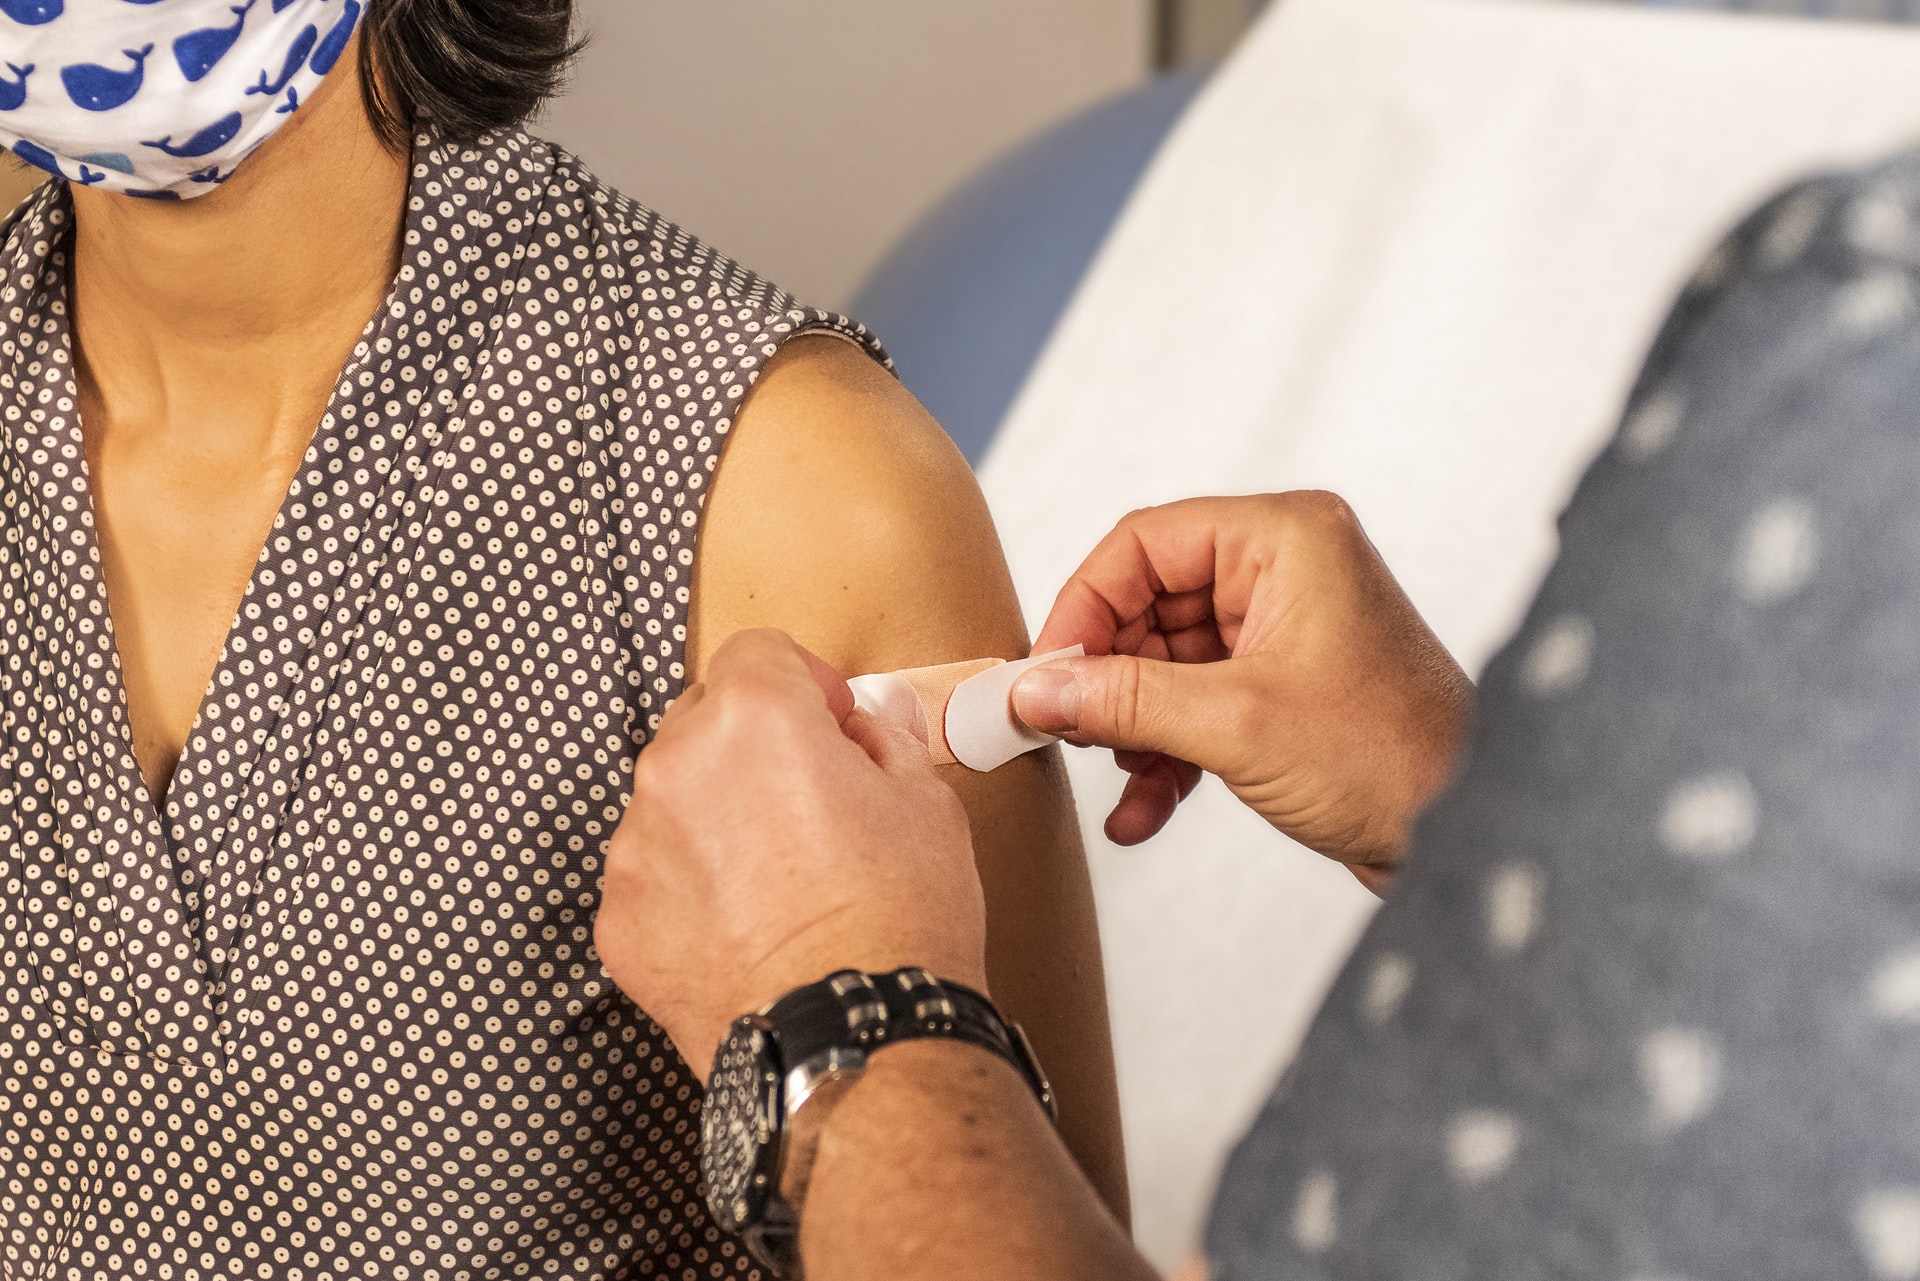 A single HPV vaccine is effective against the disease, a new study shows.